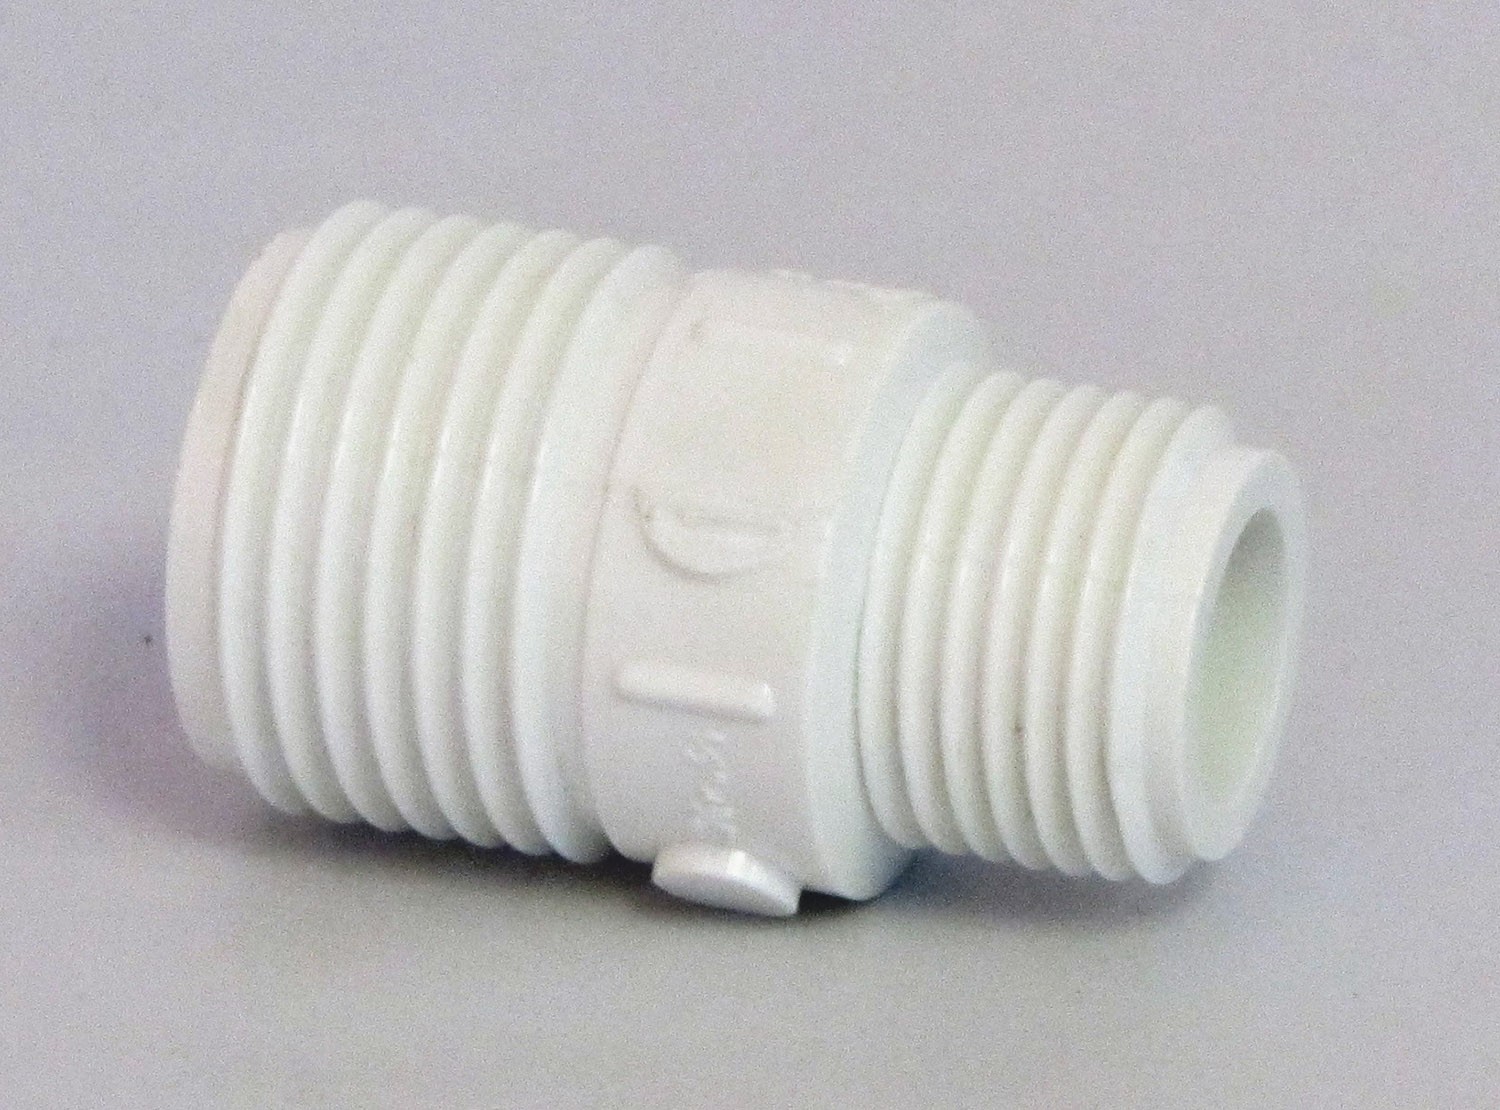 0.5" to 0.75" threaded adapter - PVC